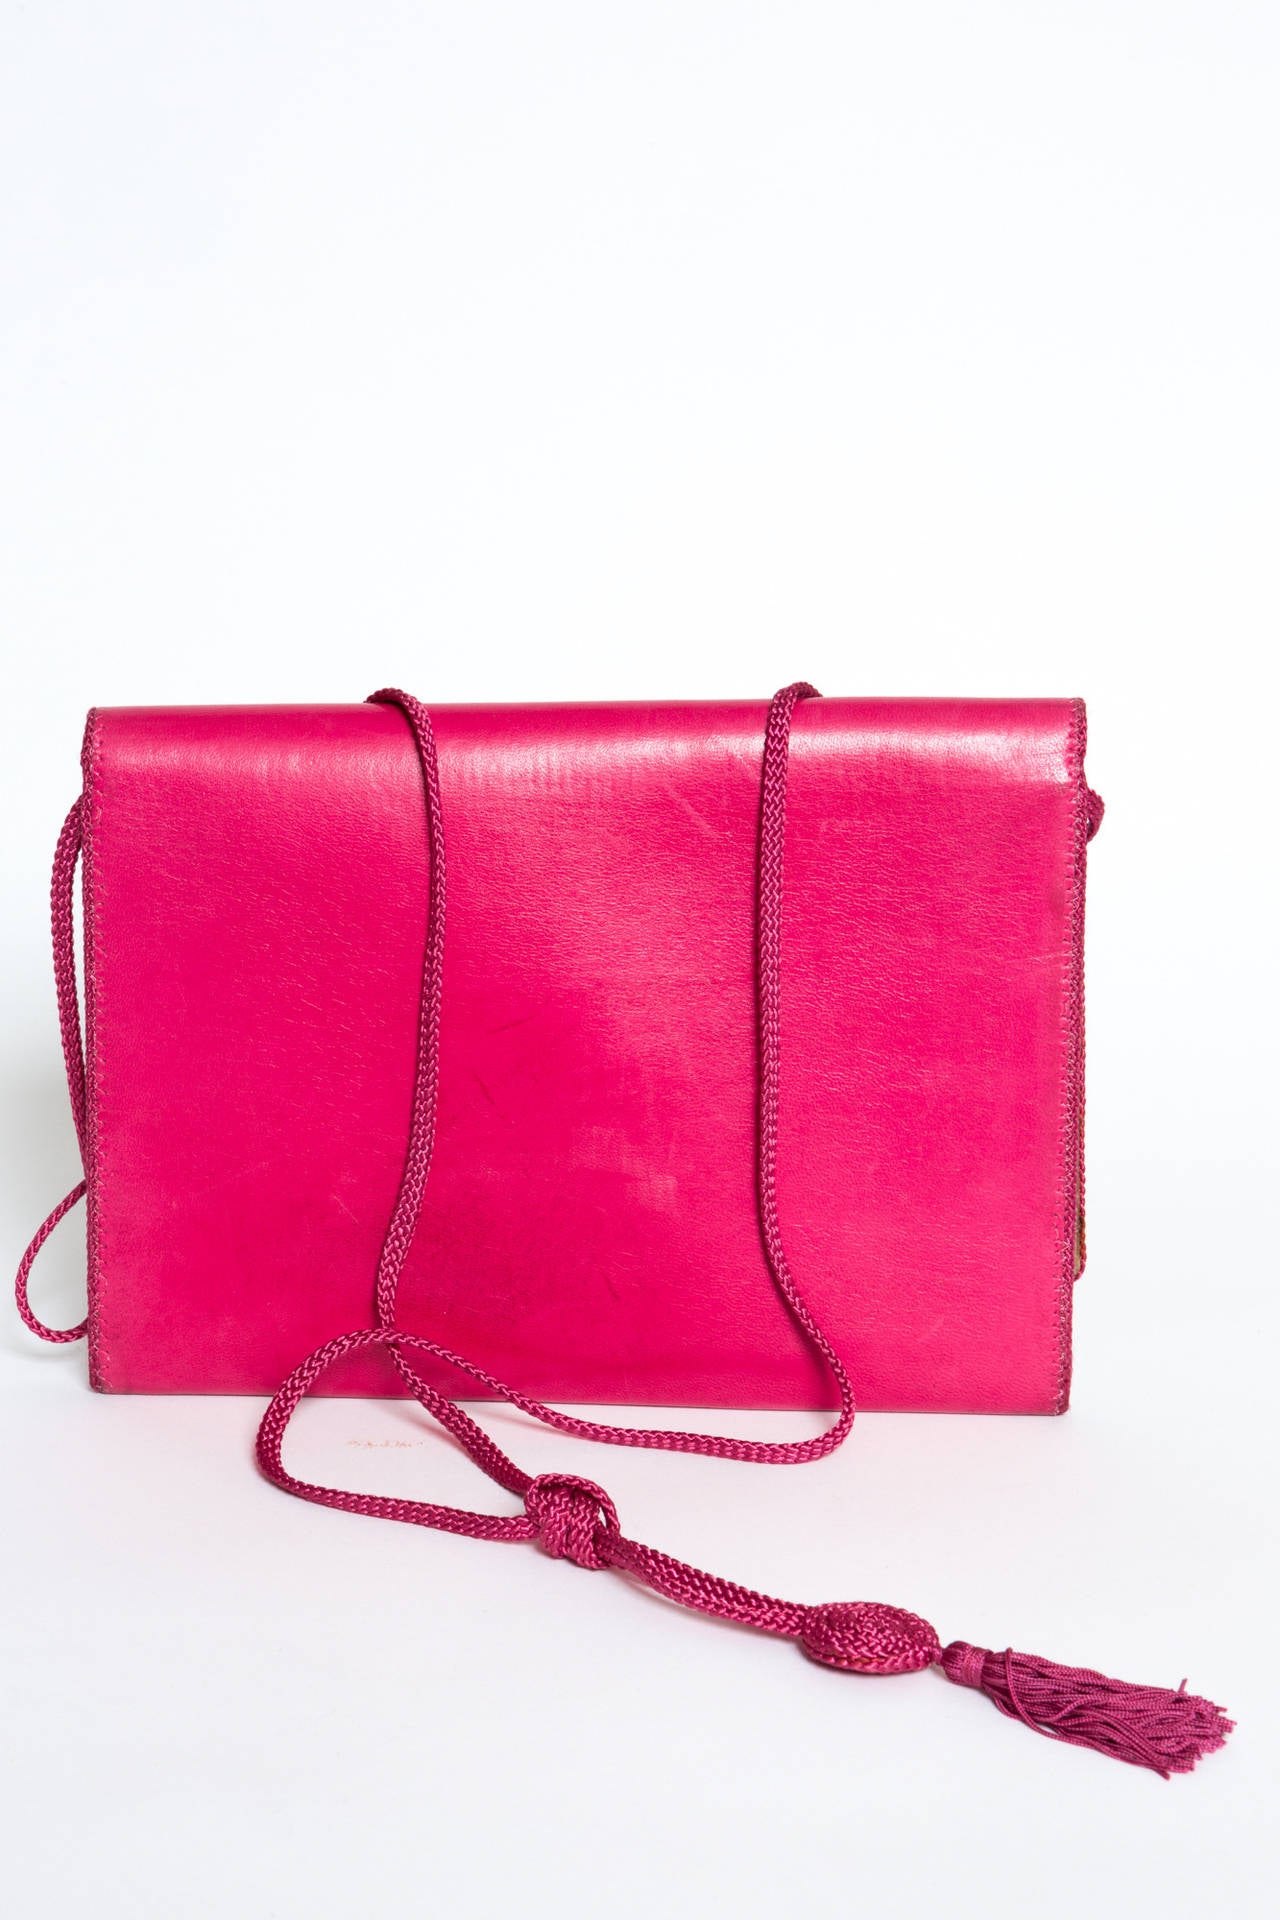 Fabulous, fuschia Saint-Laurent leather shoulder bag, featuring black stone cabochon, a snap closure, a braided piping aroud the bag and a braided long strap (124cm).